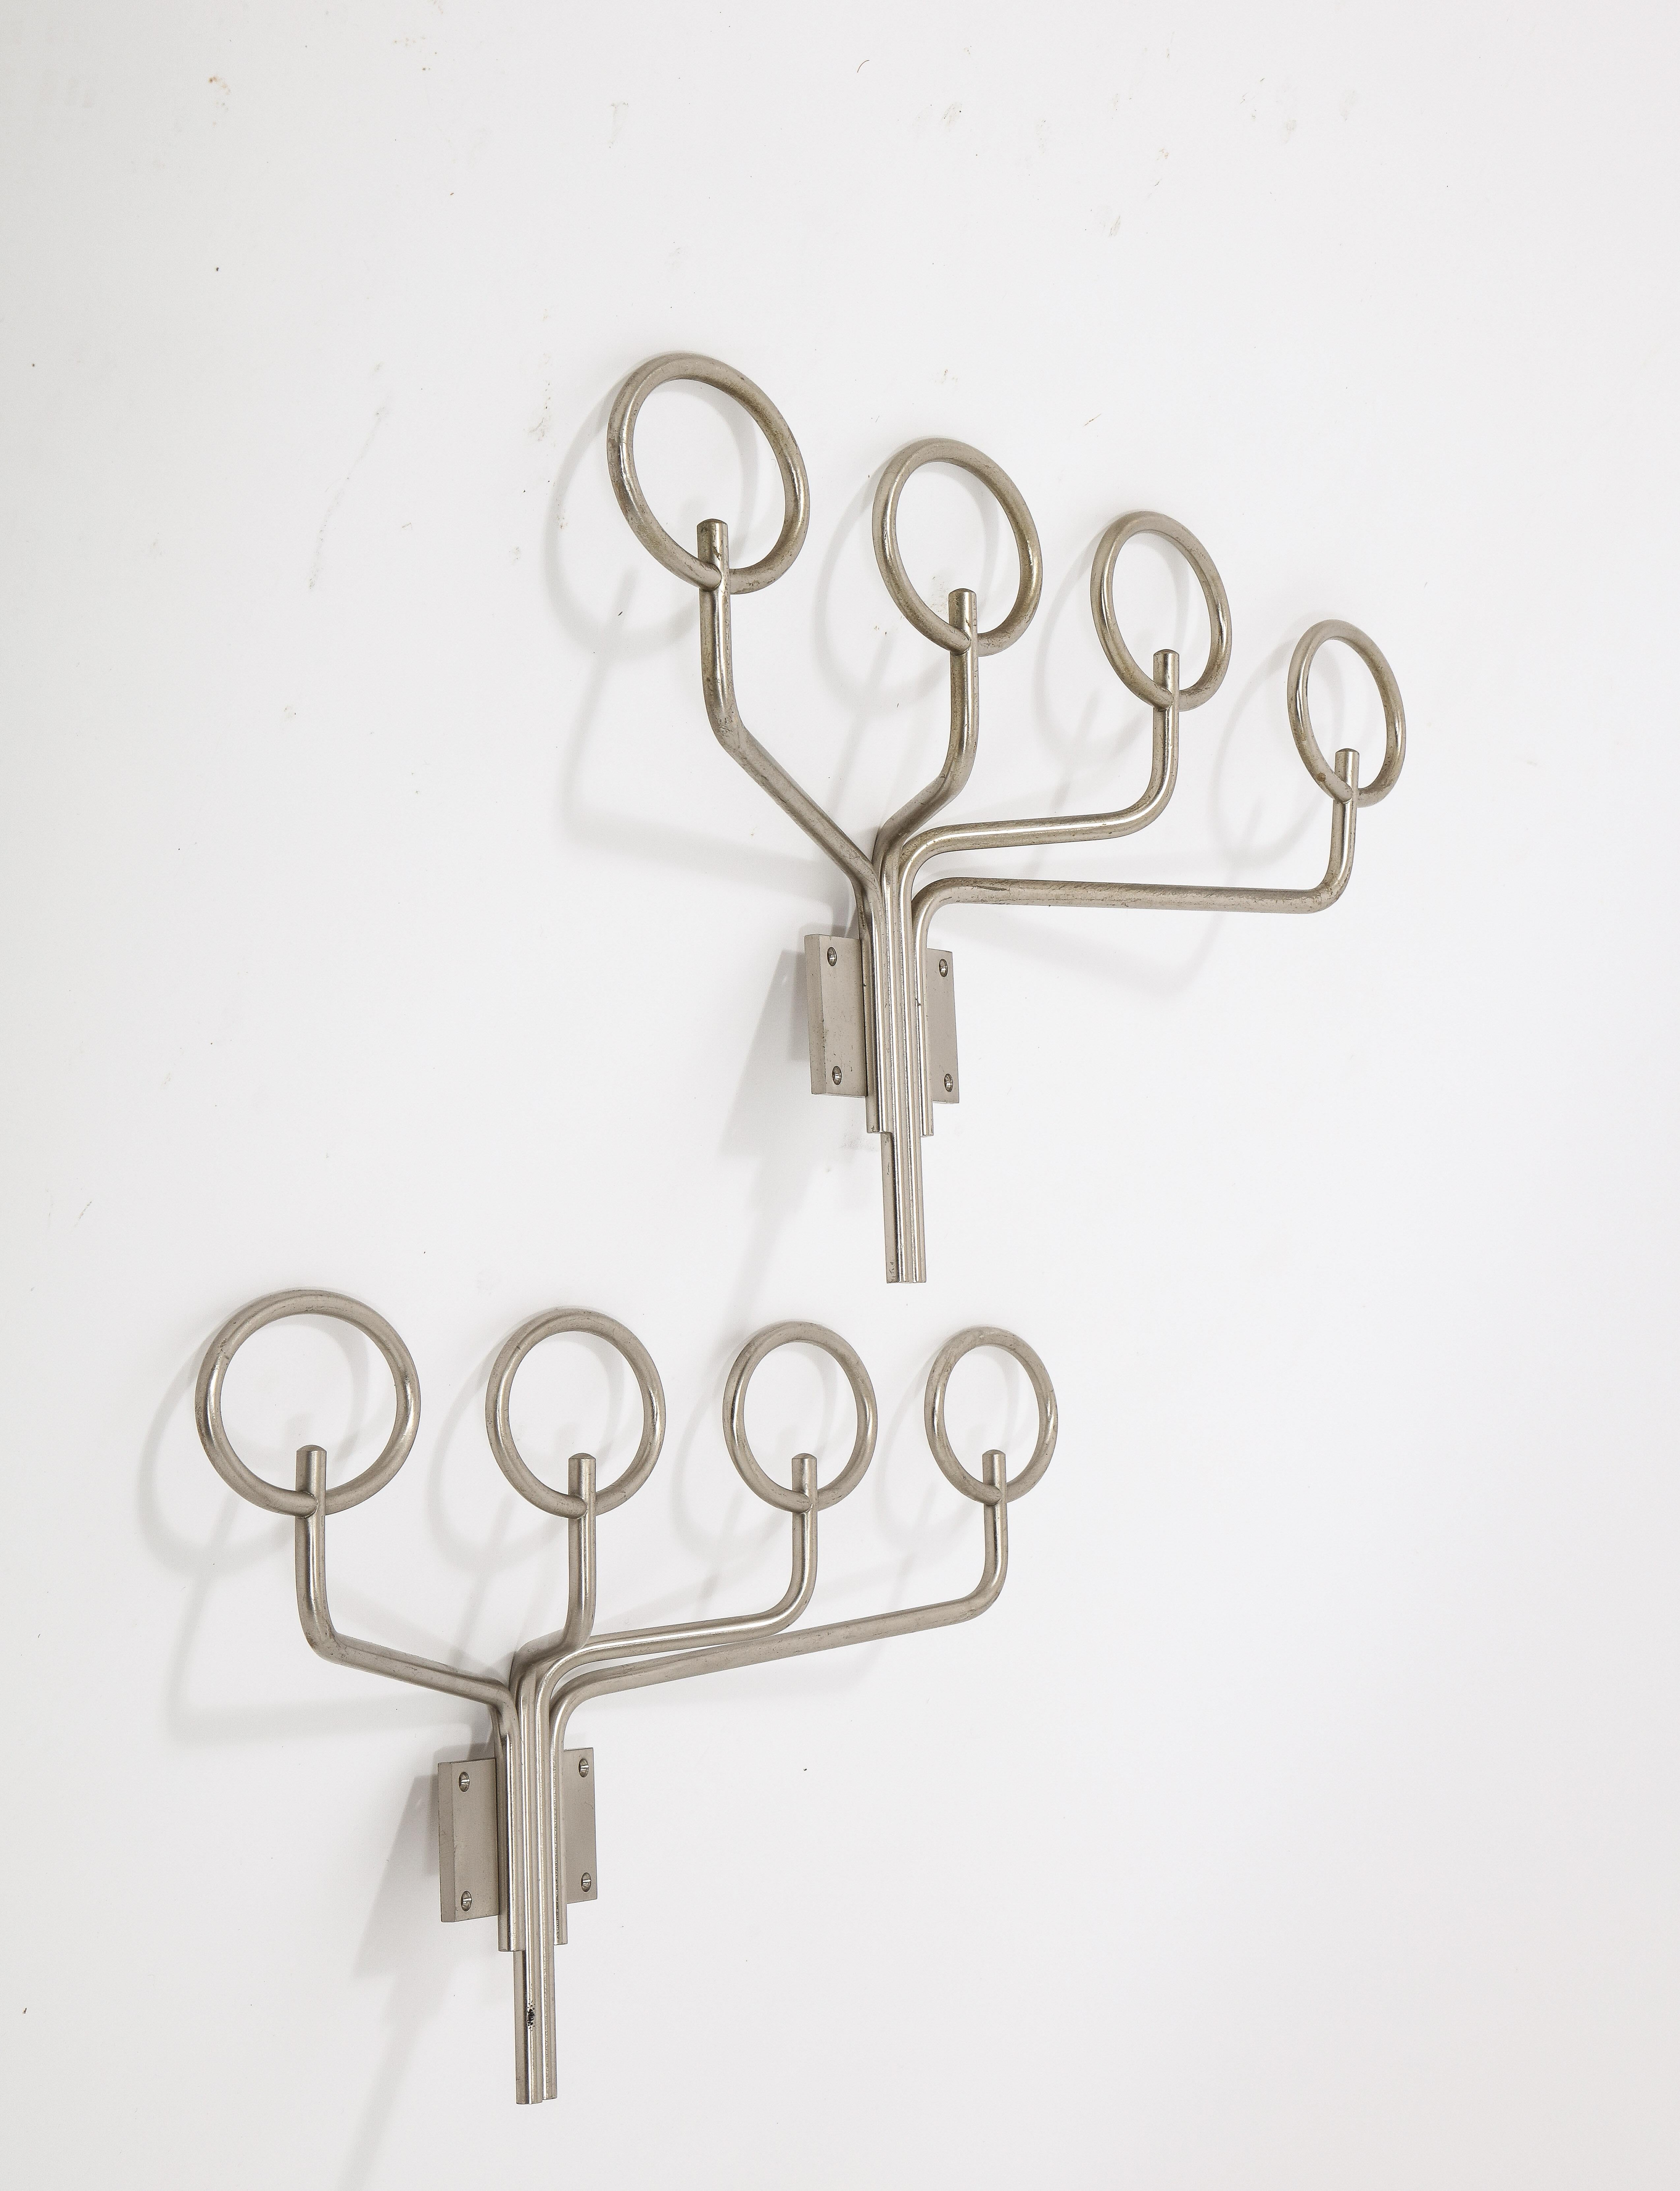 A pair of sculptural stainless steel coatracks with a distinctive 70's flair.